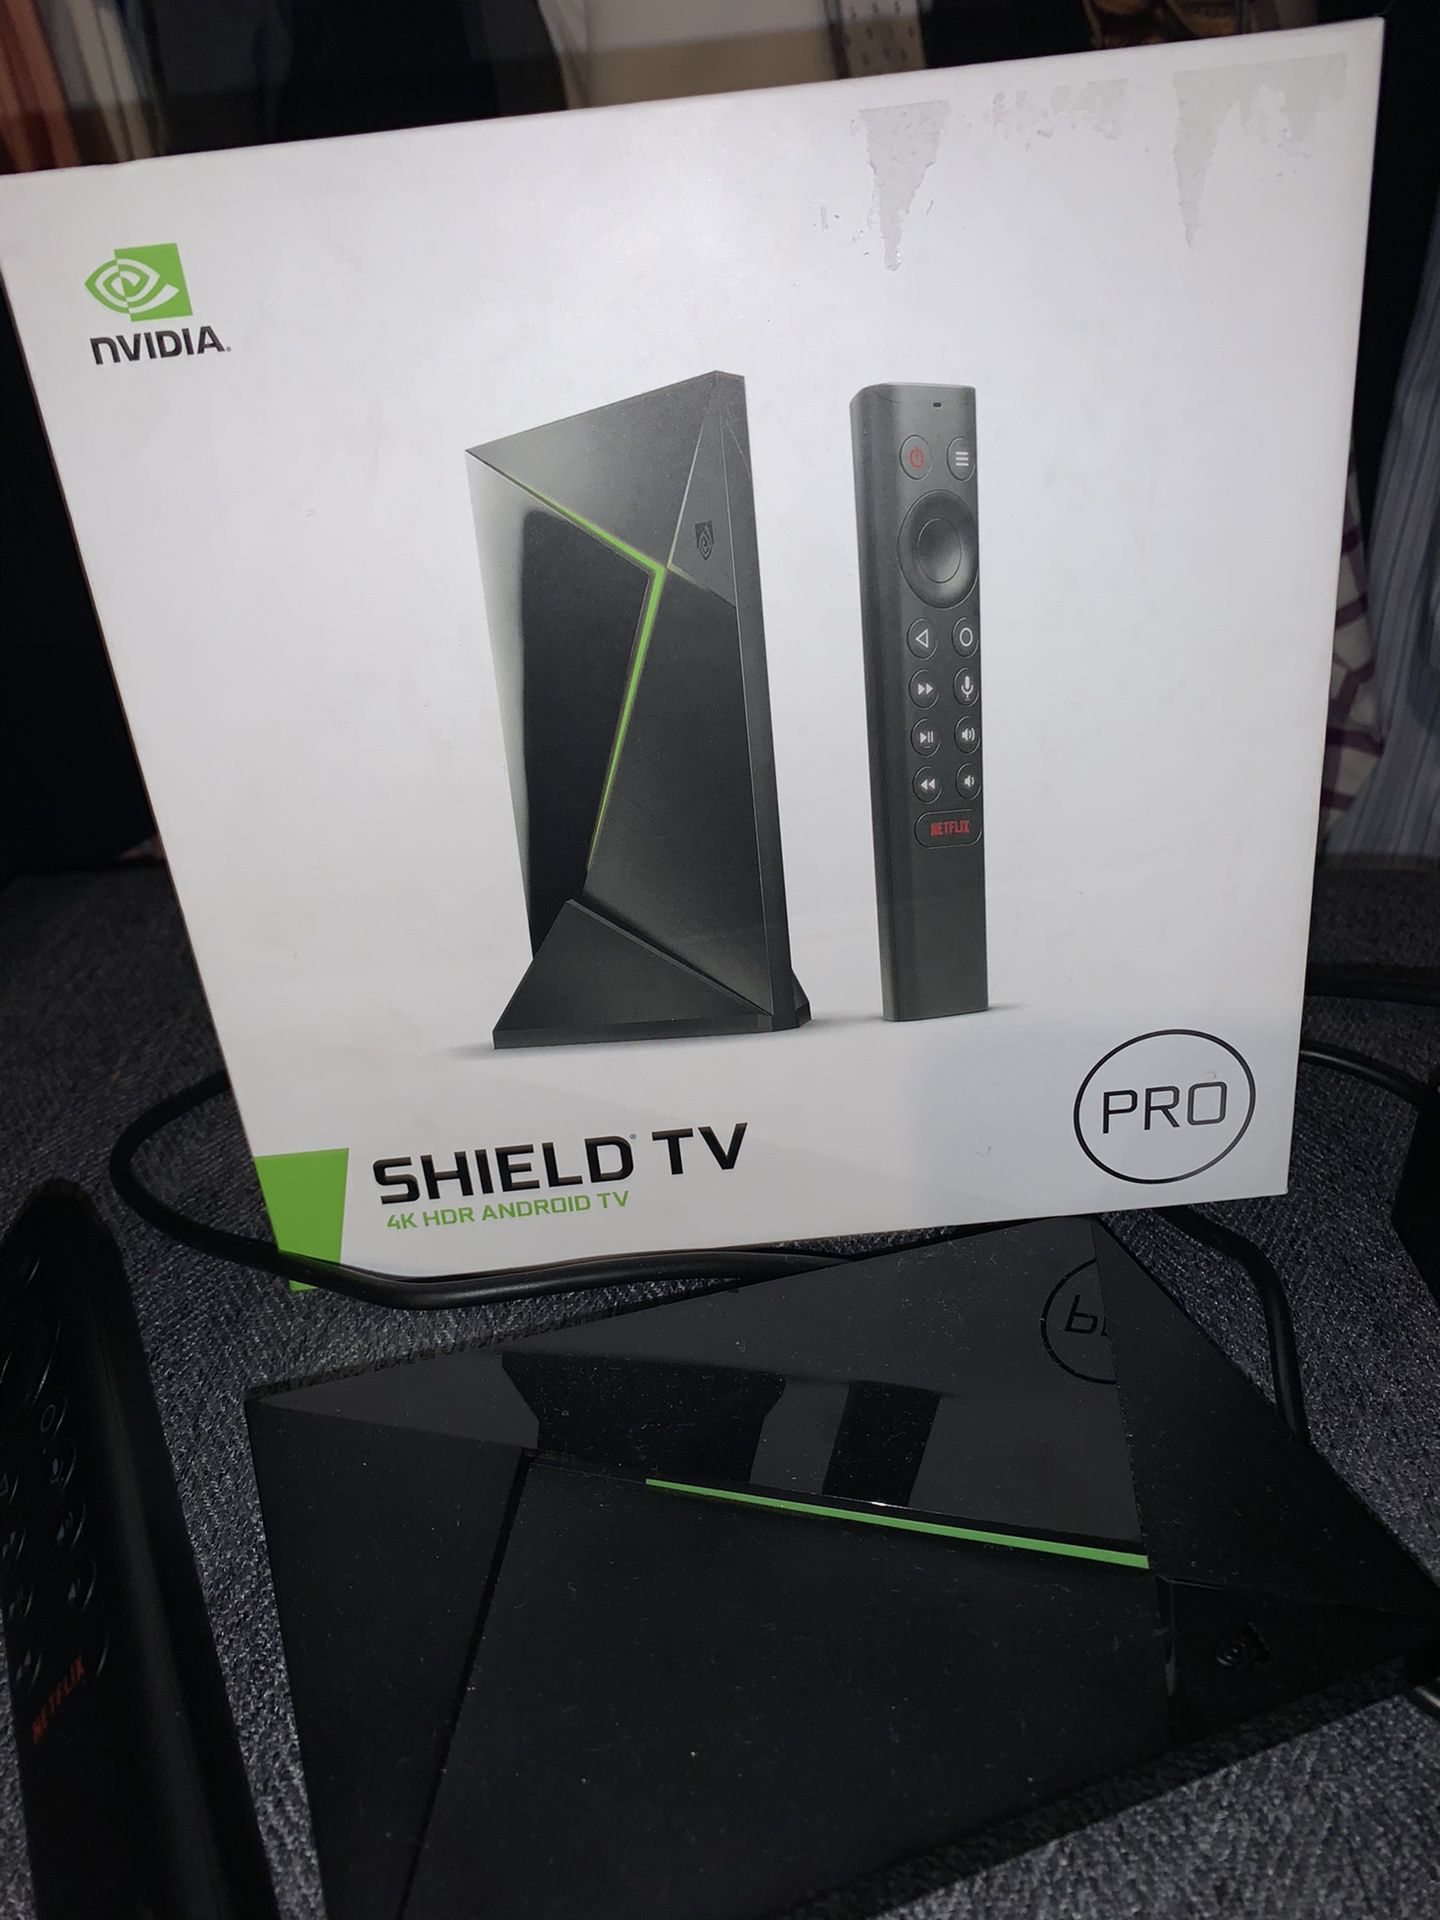 SHIELD TV 4K HDR ANDROID TV